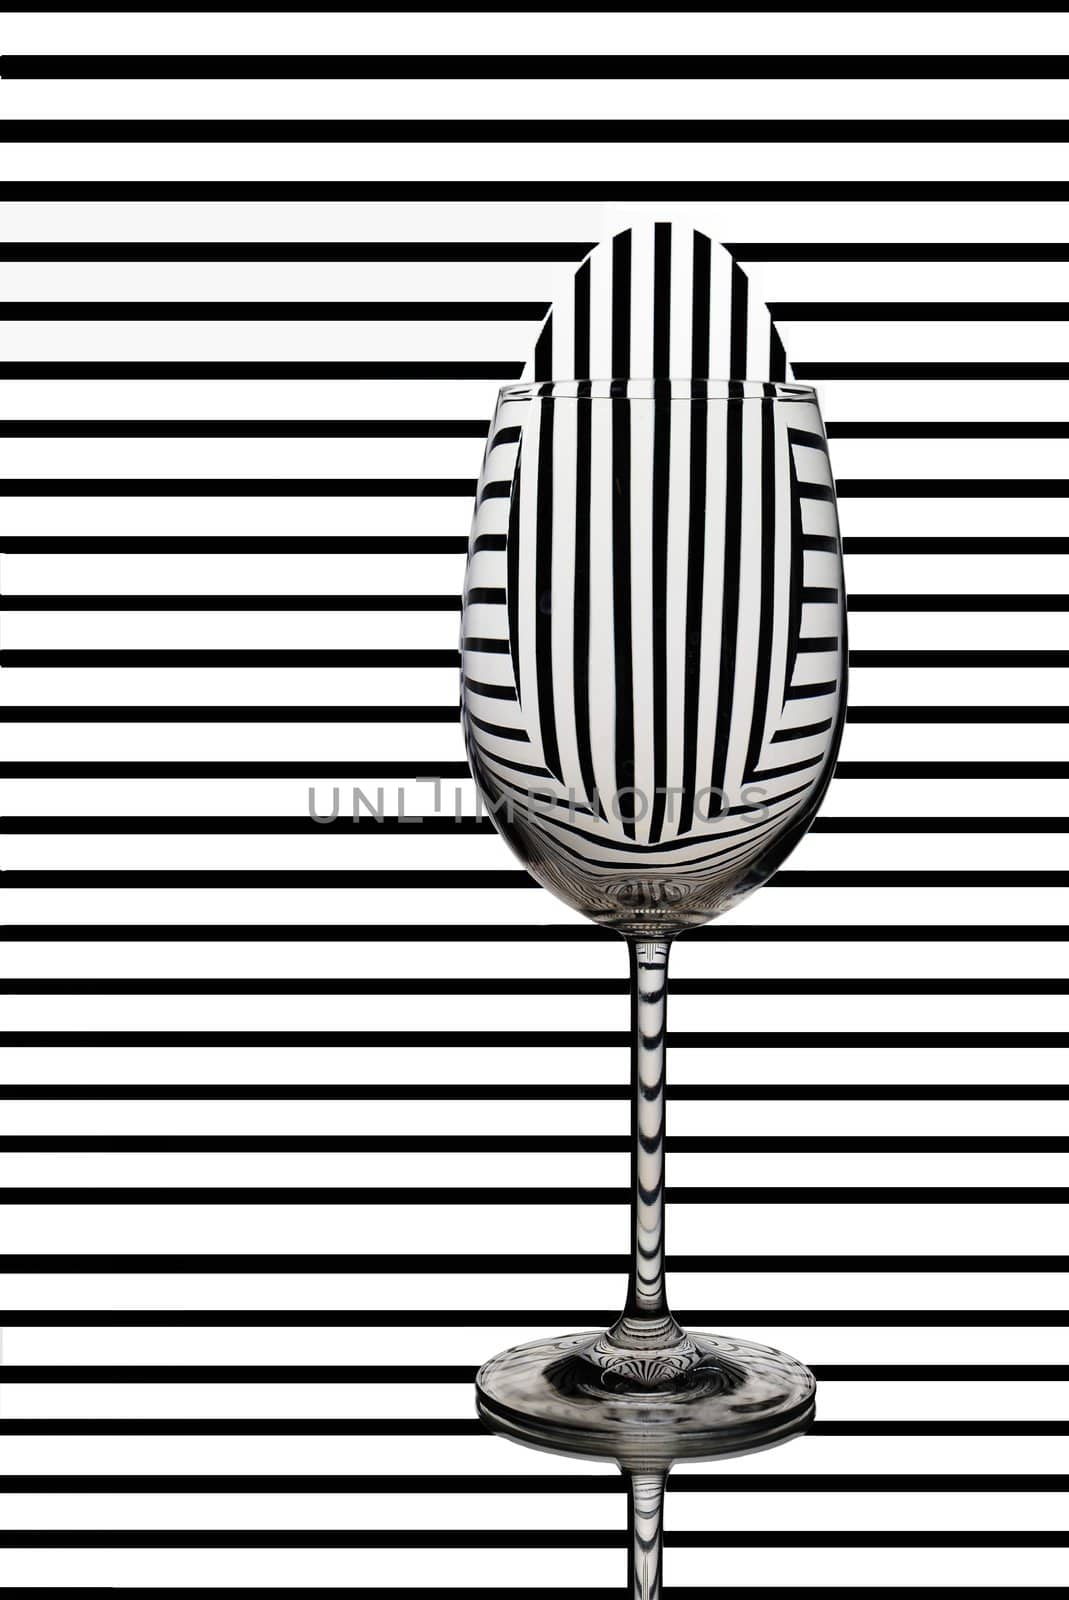  Elegant Tall Wineglass For Red Wine  Over Striped  Background.